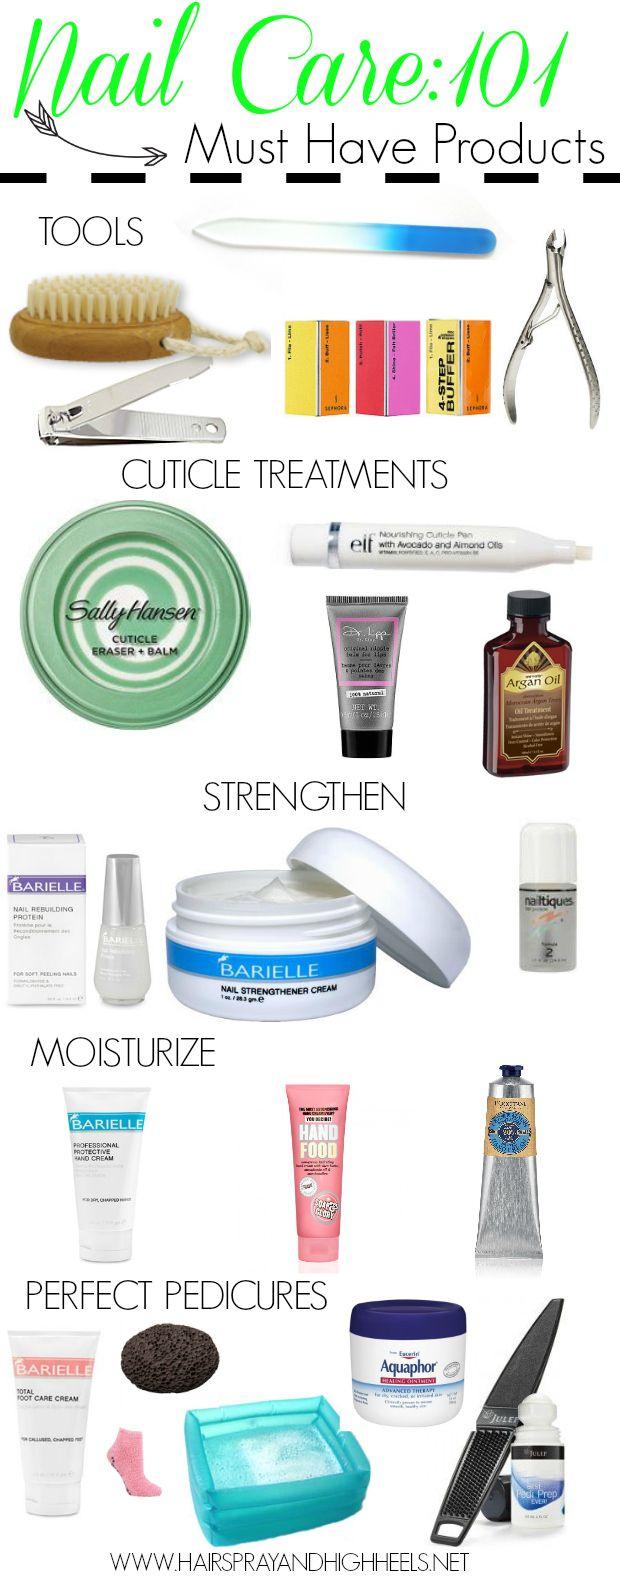 Hochzeit - Nail Care 101: Best Nail Care Products